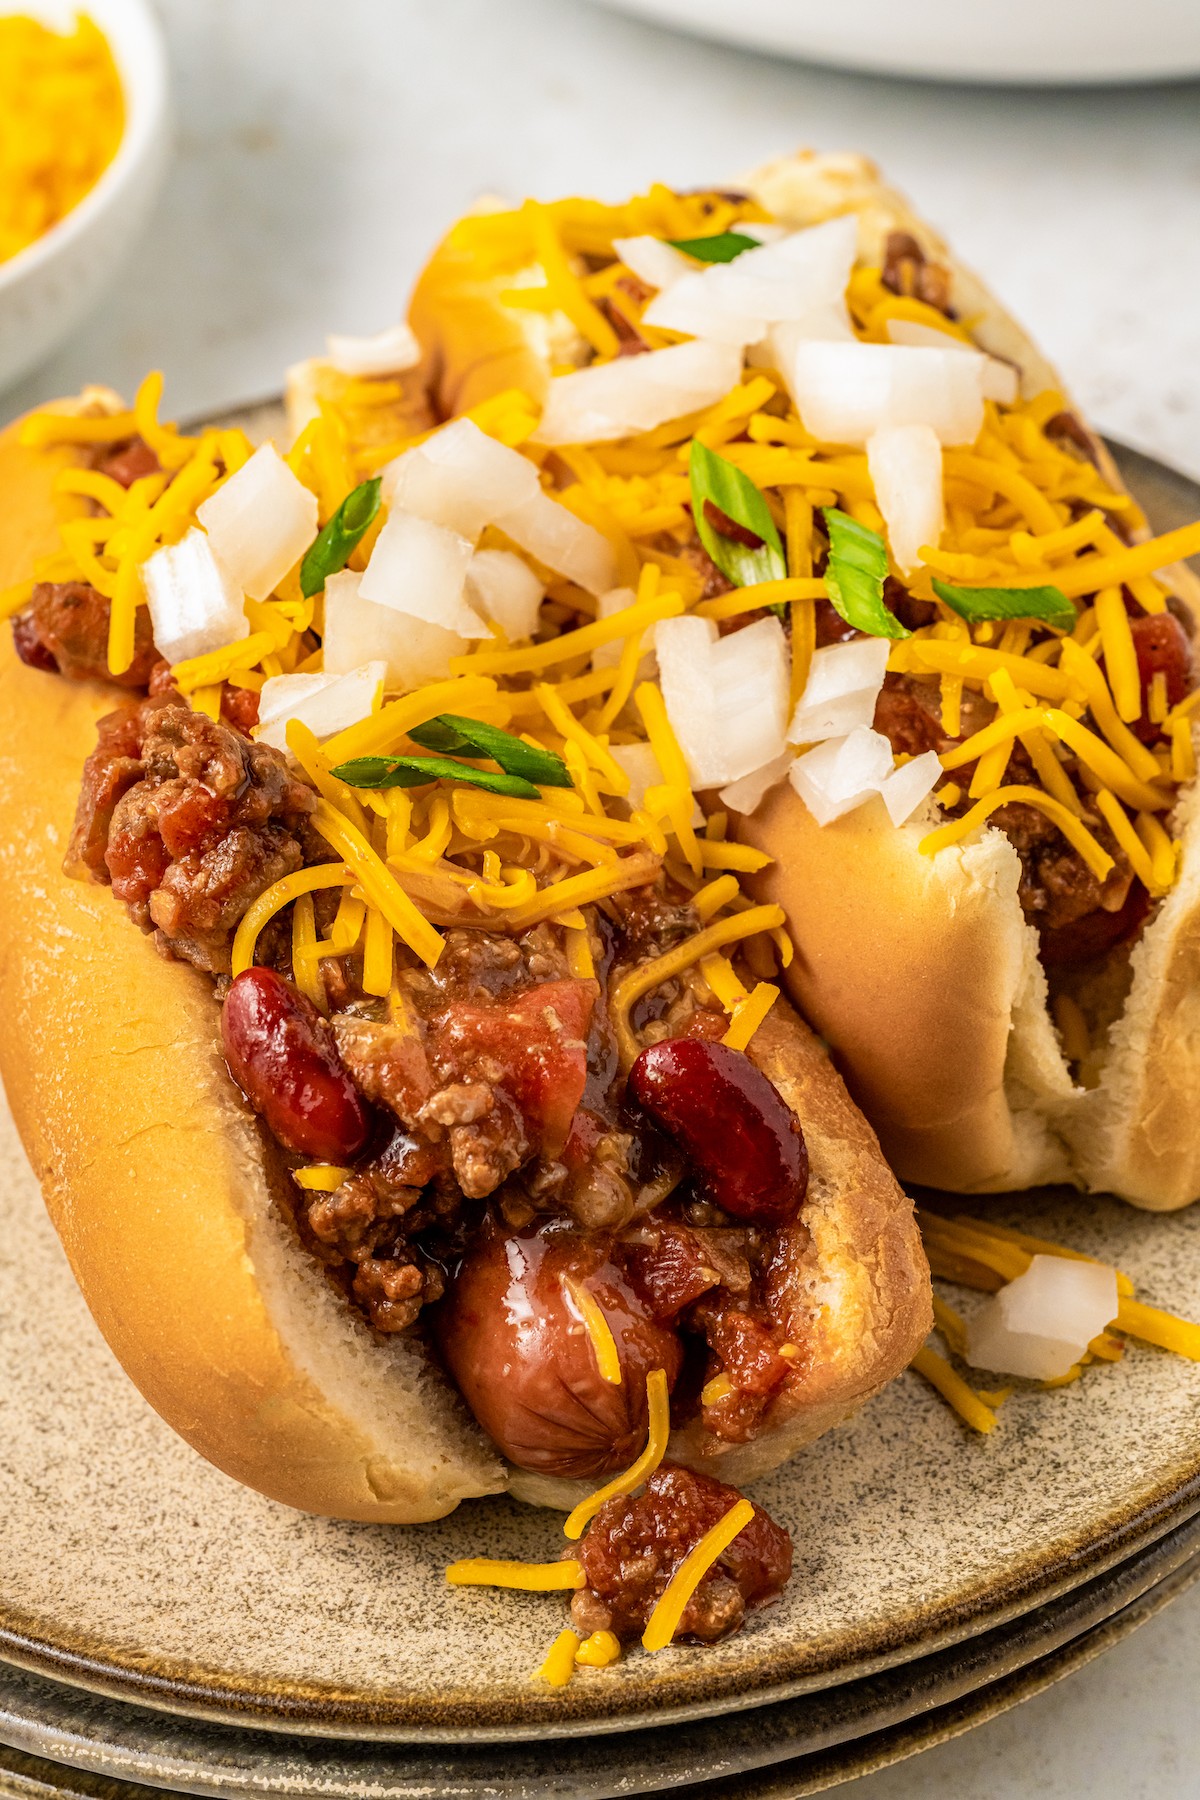 Two hot dogs topped with chili, cheese, and chopped onion.